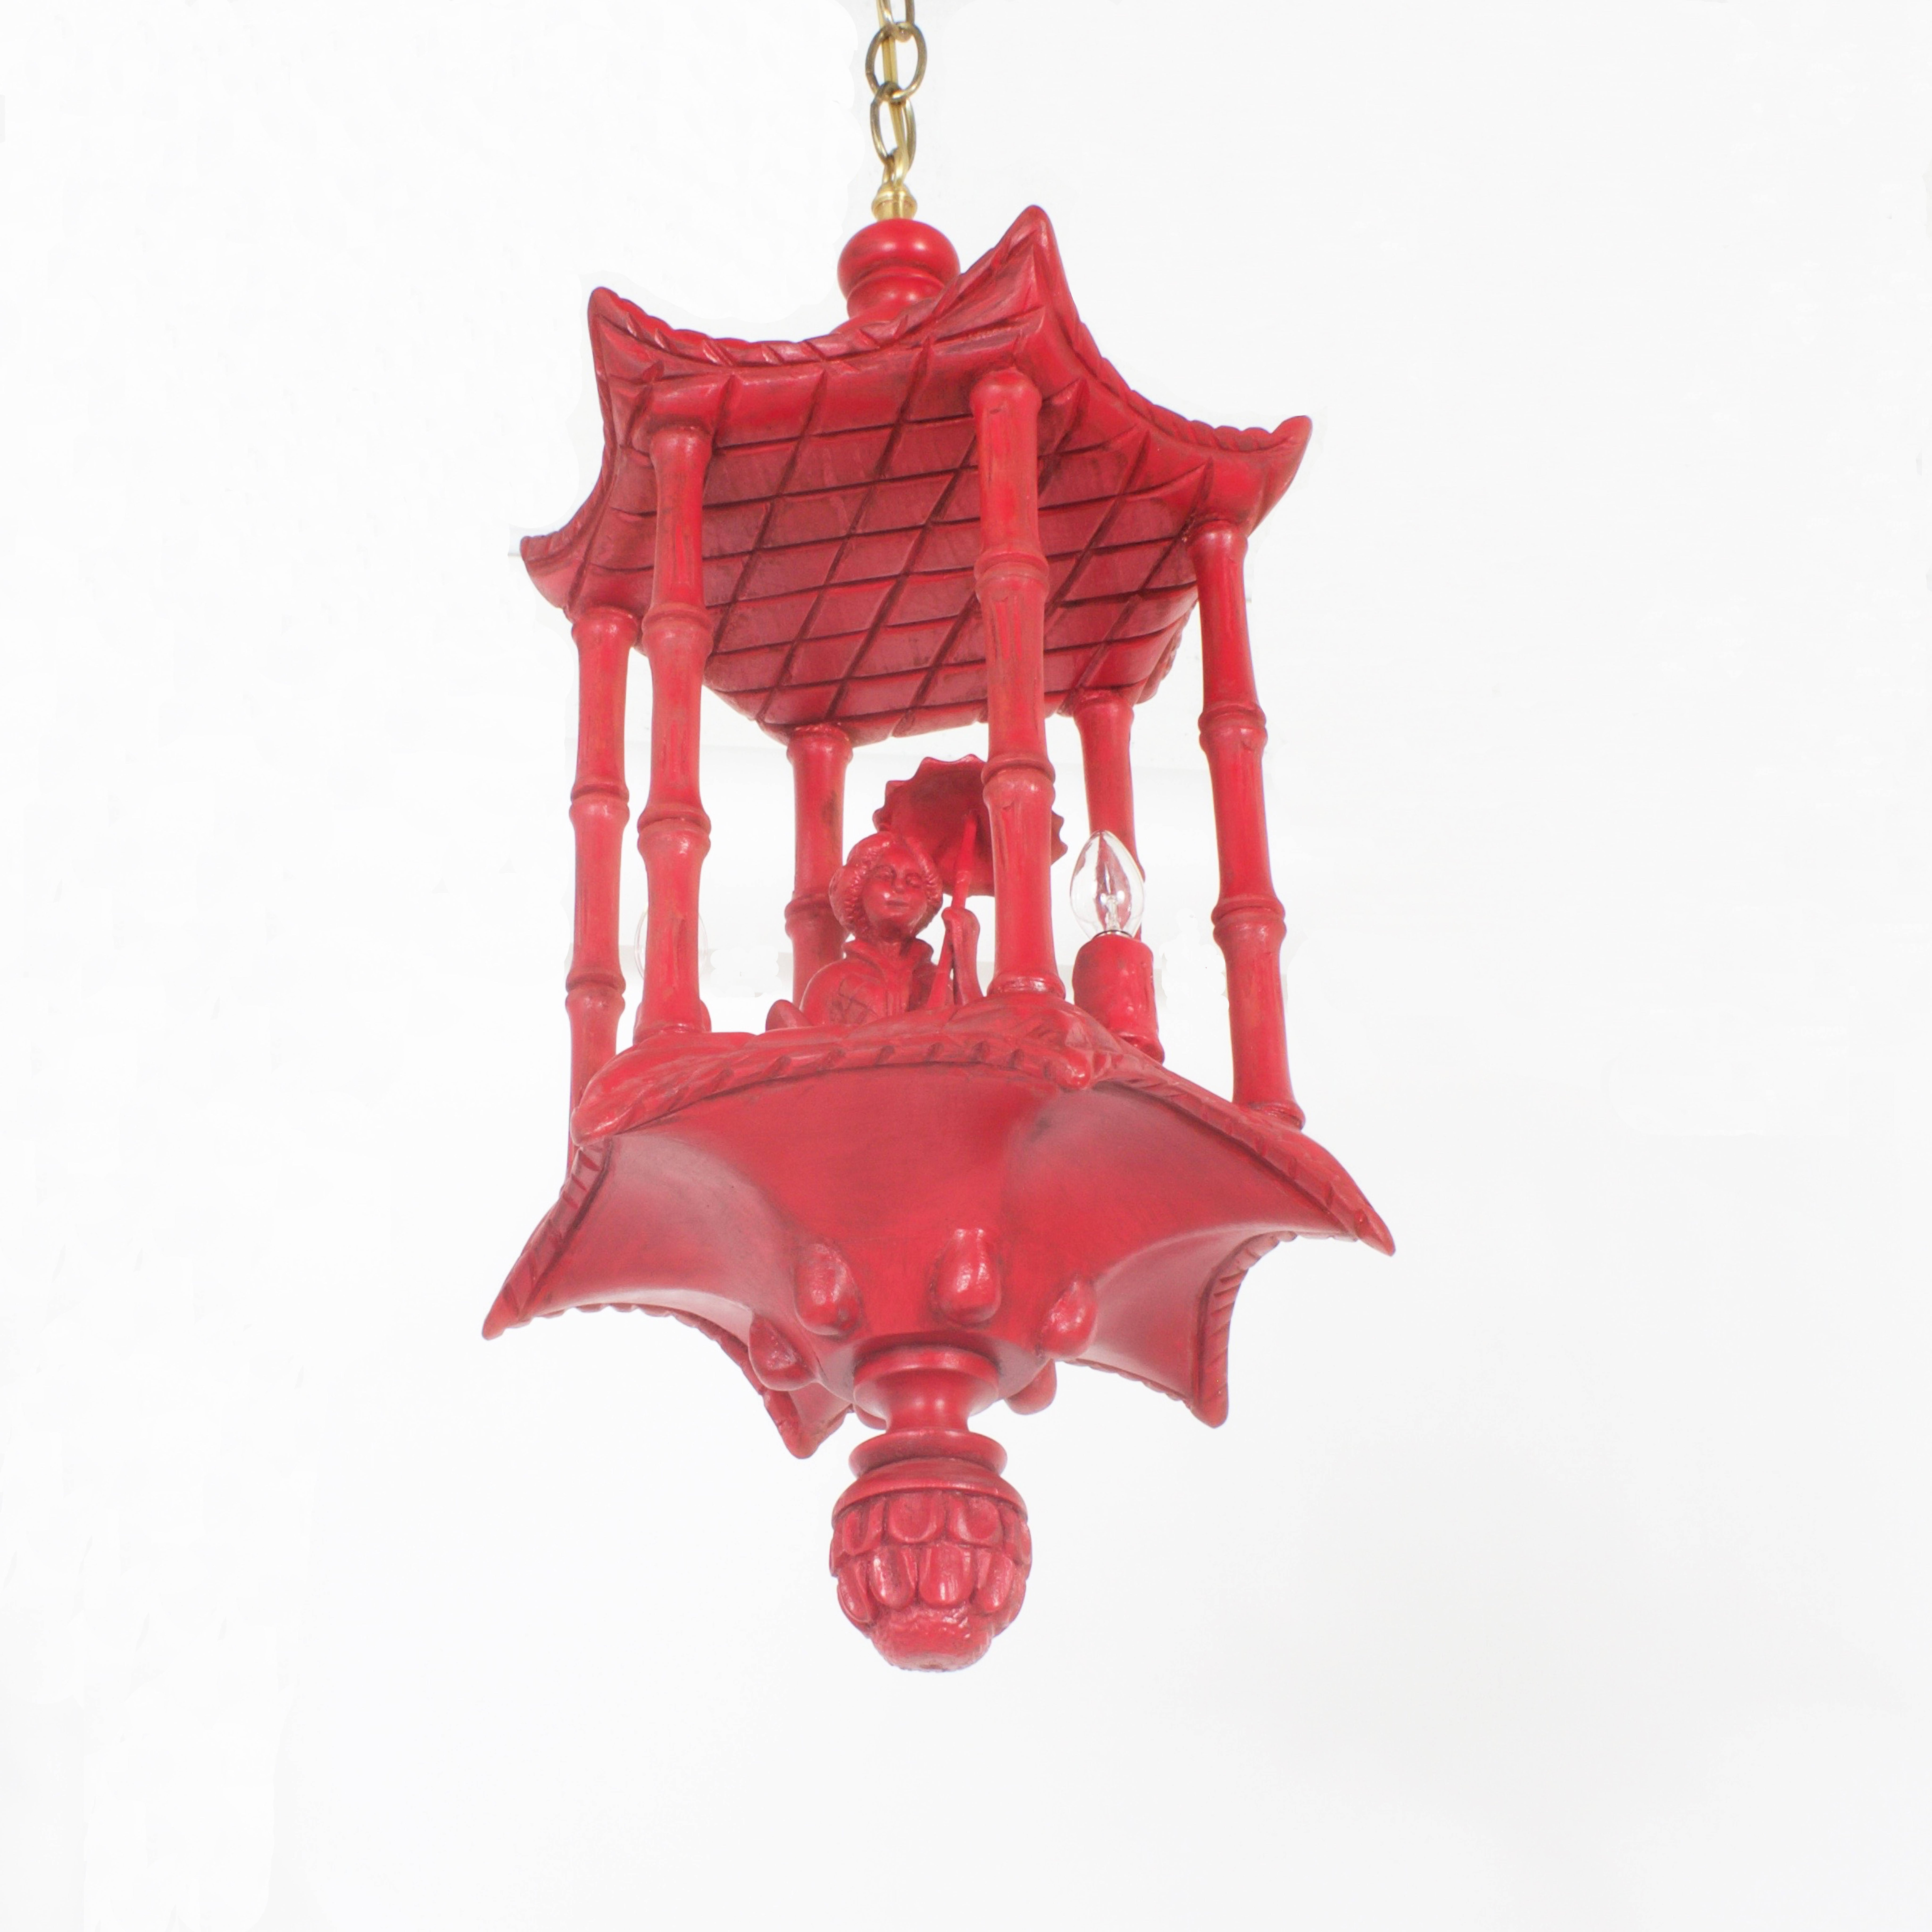 Chic, stylish midcentury red lacquer pagoda lantern or light fixture with a chinoiserie seated female figure holding an umbrella. Having a pagoda shaped top, faux bamboo columns and an inverted pagoda platform with a pineapple finial at the bottom.